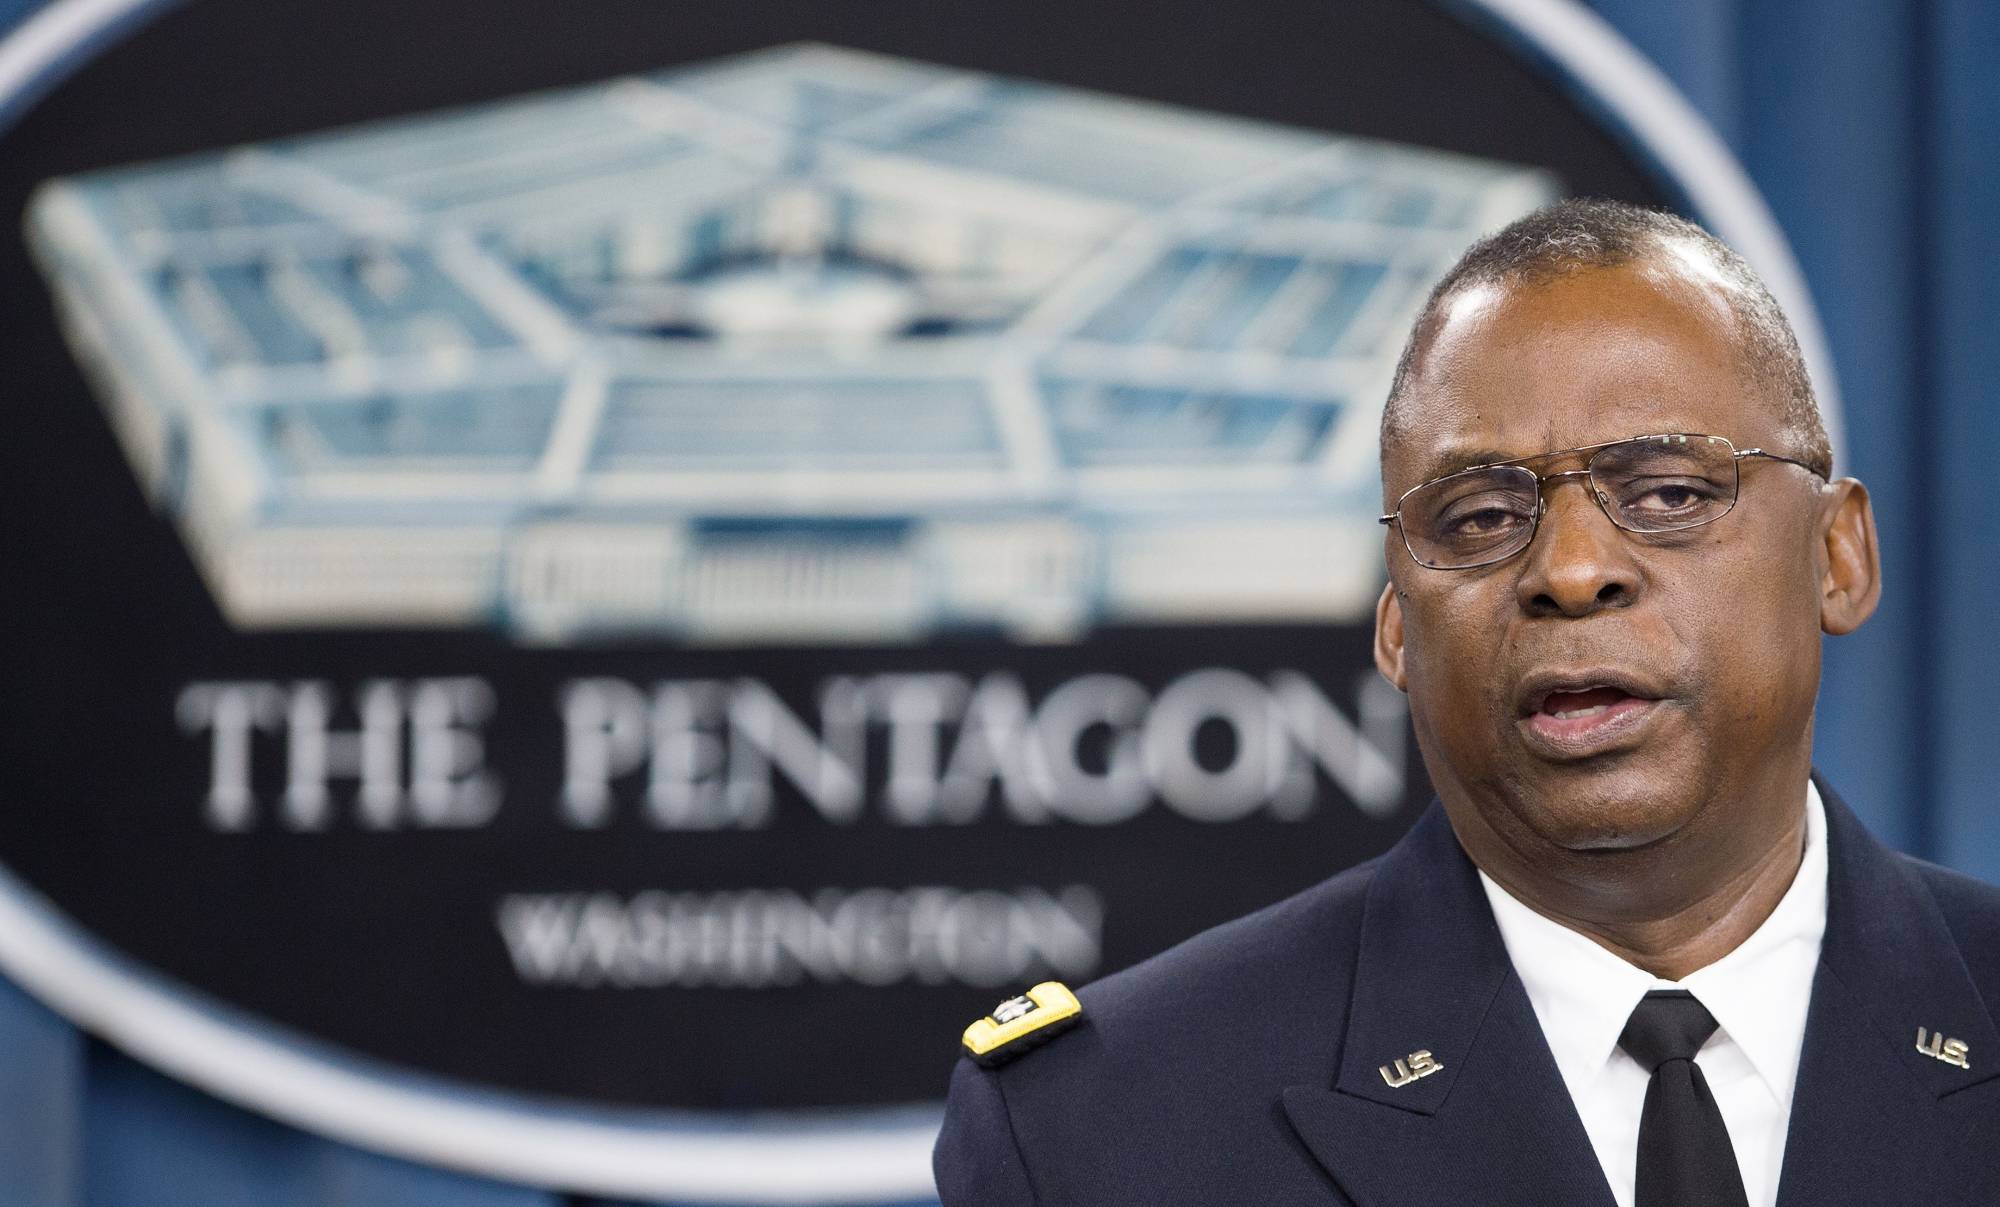 Then-U.S. Central Command chief Gen. Lloyd Austin holds a briefing at the Pentagon in Washington in October 2014. | AFP-JIJI